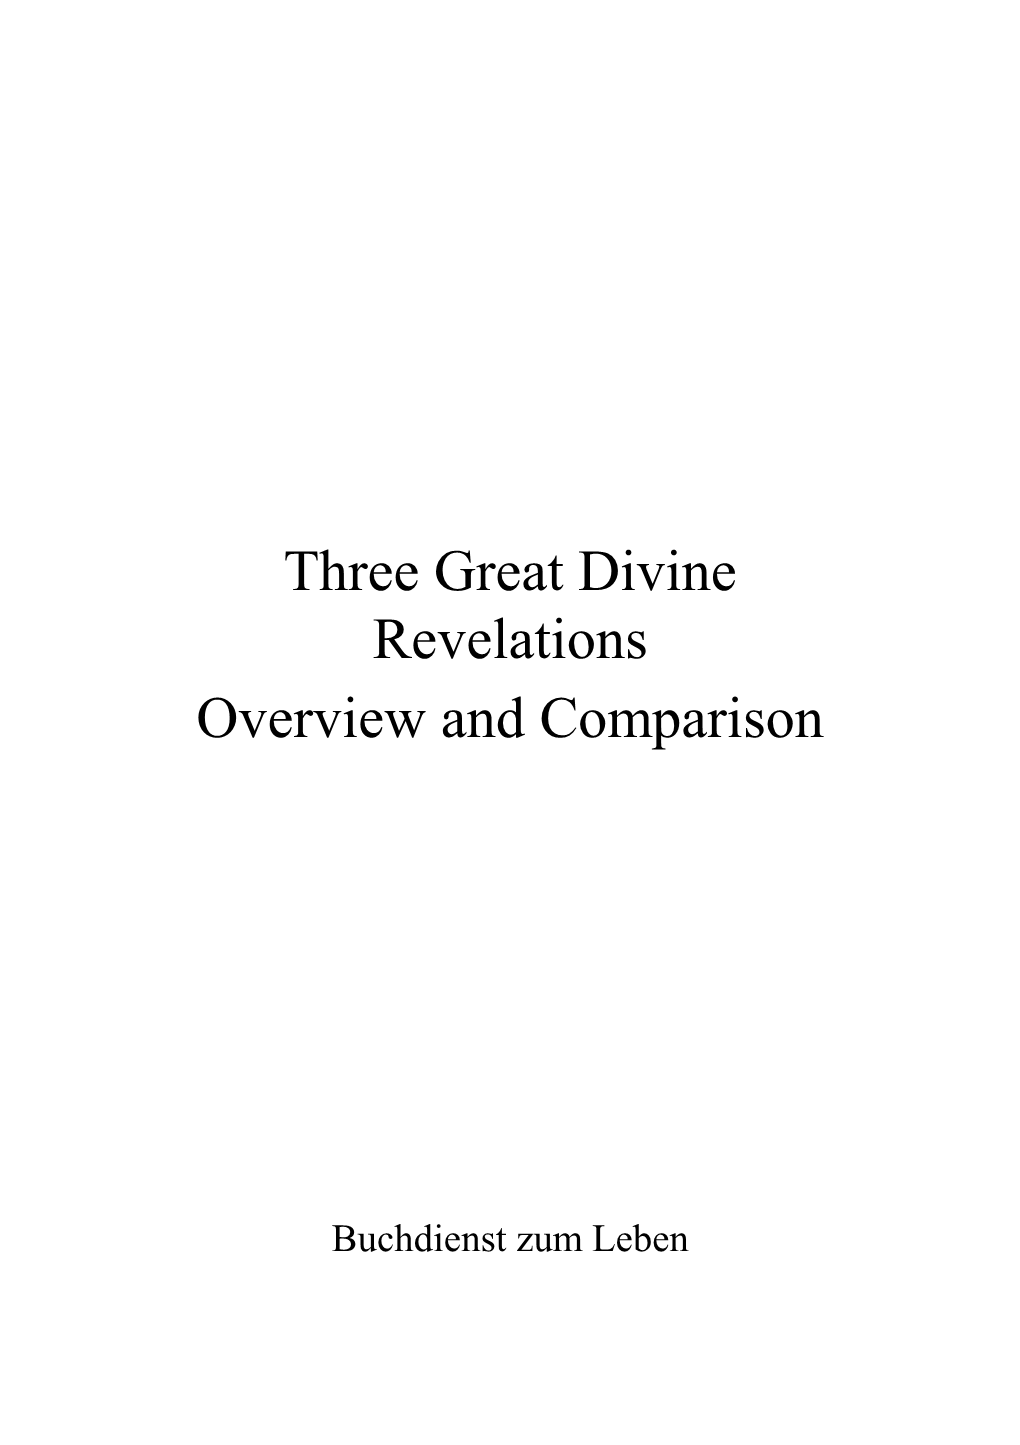 Three Great Divine Revelations Overview and Comparison